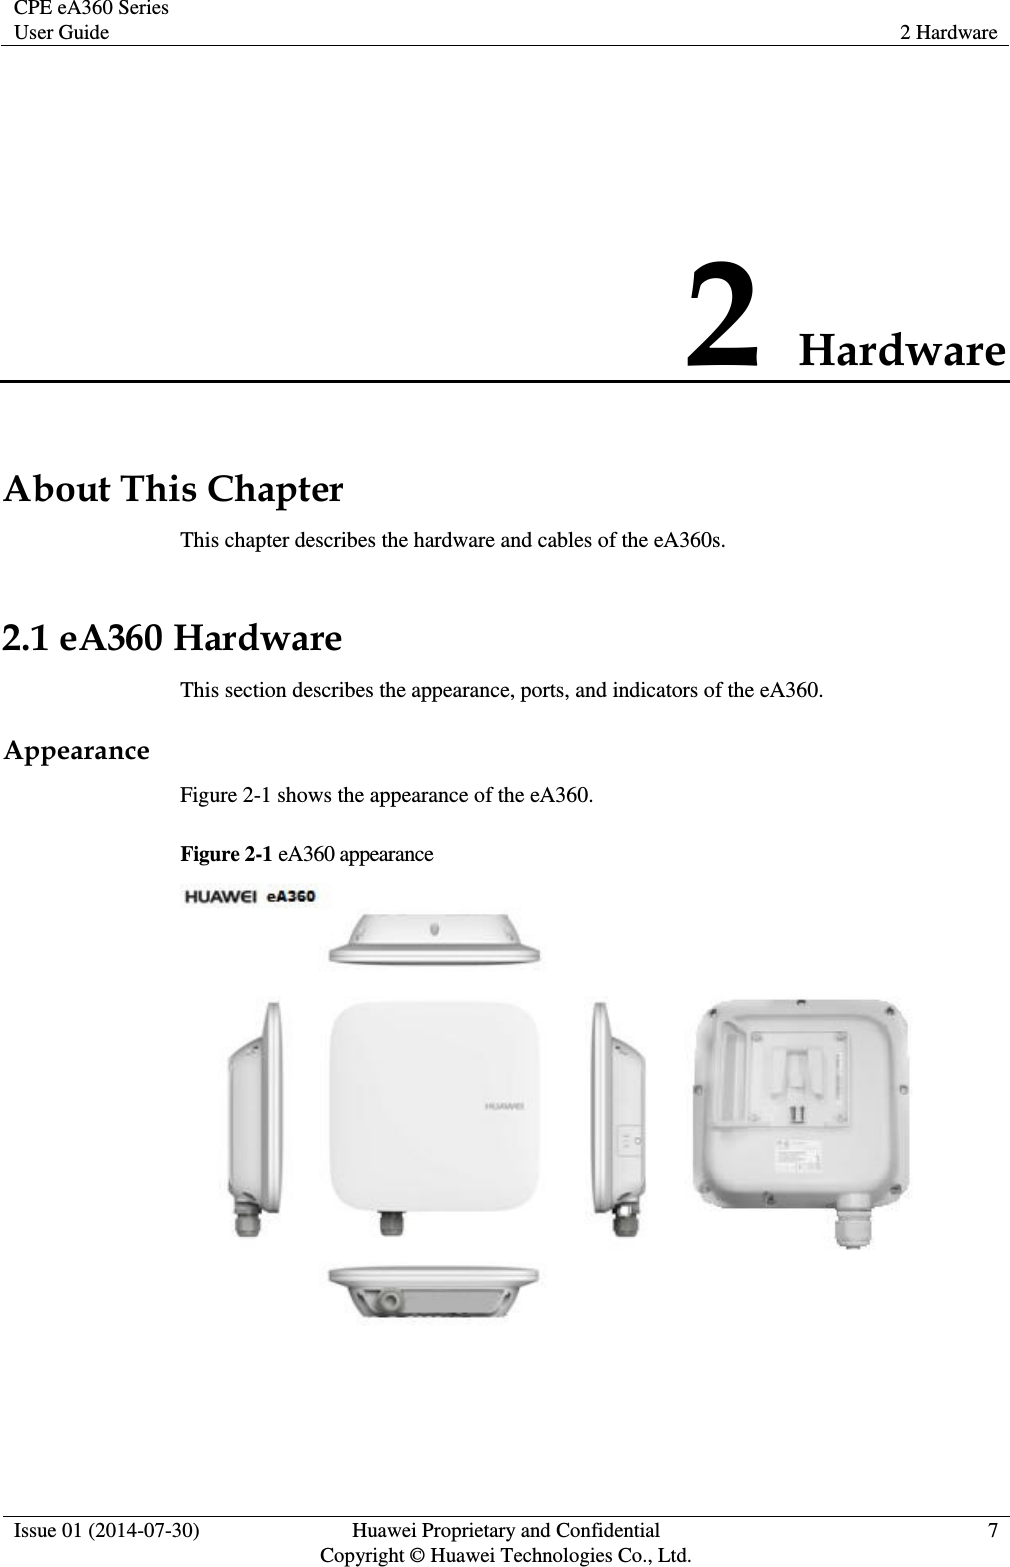 CPE eA360 Series User Guide 2 Hardware  Issue 01 (2014-07-30) Huawei Proprietary and Confidential                                     Copyright © Huawei Technologies Co., Ltd. 7  2 Hardware About This Chapter This chapter describes the hardware and cables of the eA360s. 2.1 eA360 Hardware This section describes the appearance, ports, and indicators of the eA360. Appearance Figure 2-1 shows the appearance of the eA360. Figure 2-1 eA360 appearance   